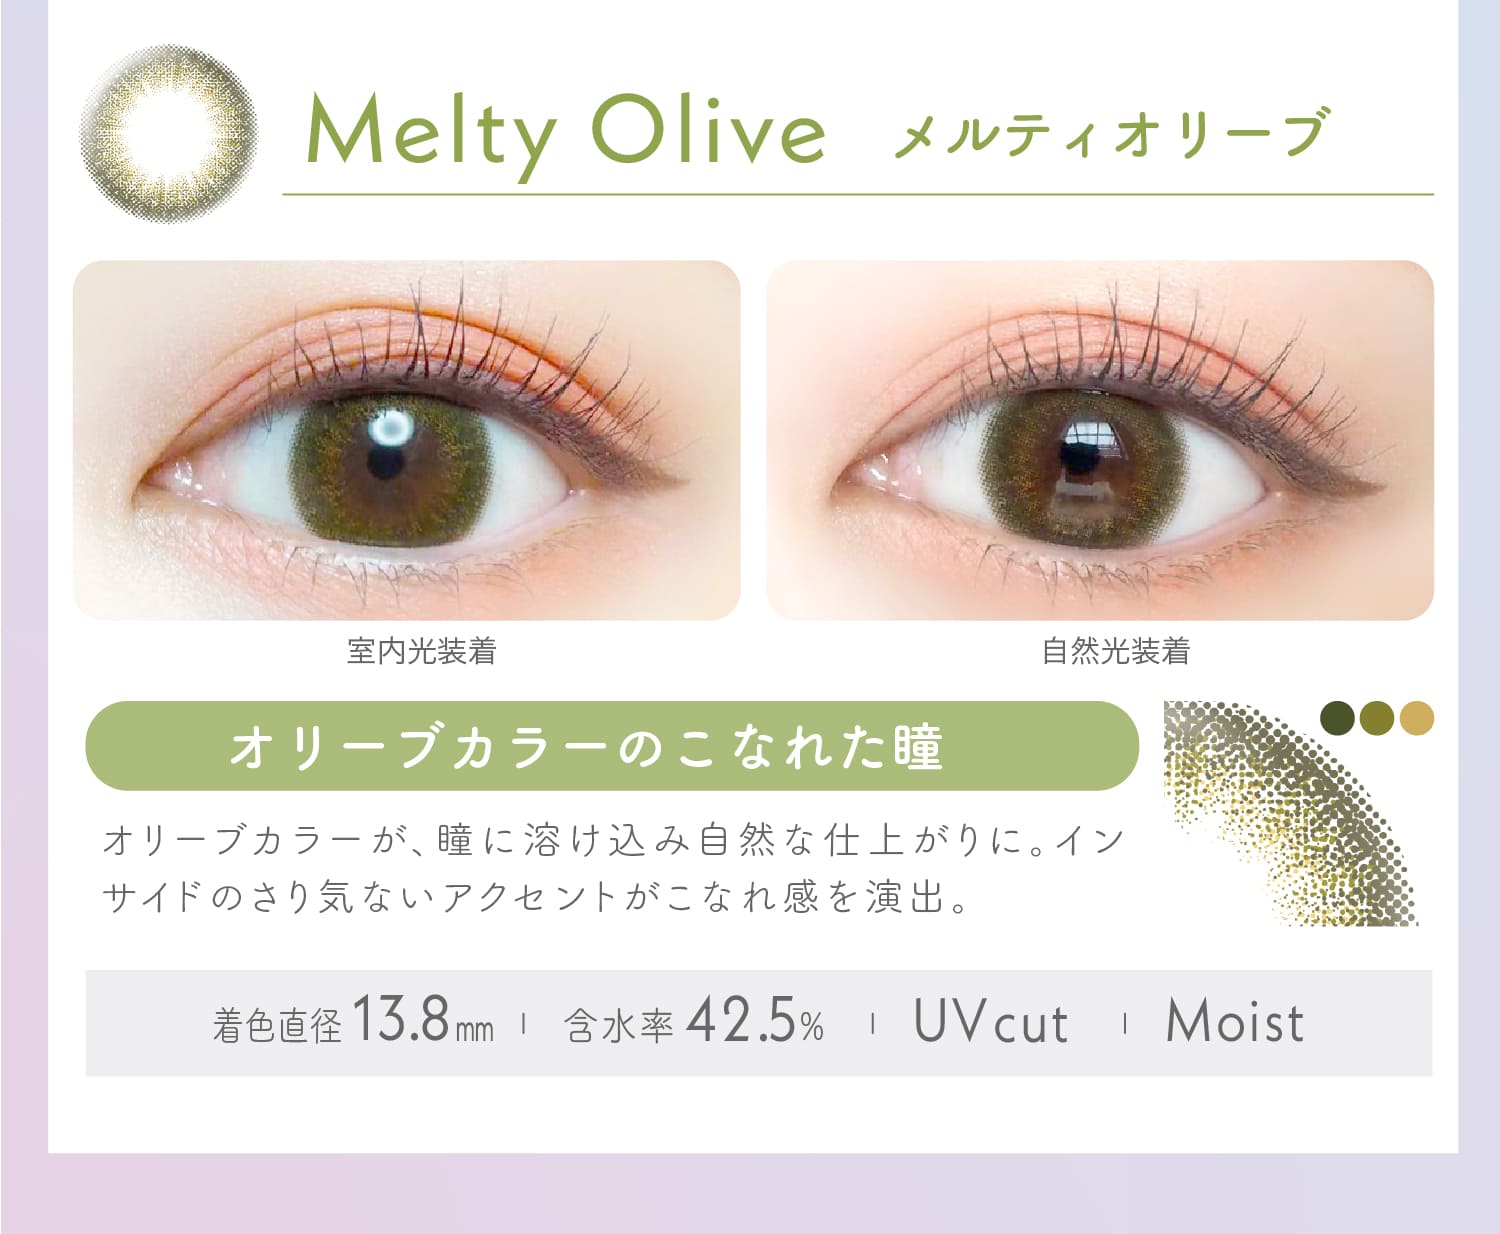 Ever Color 1day エバーカラー ワンデー【Melty Olive メルティオリーブ】